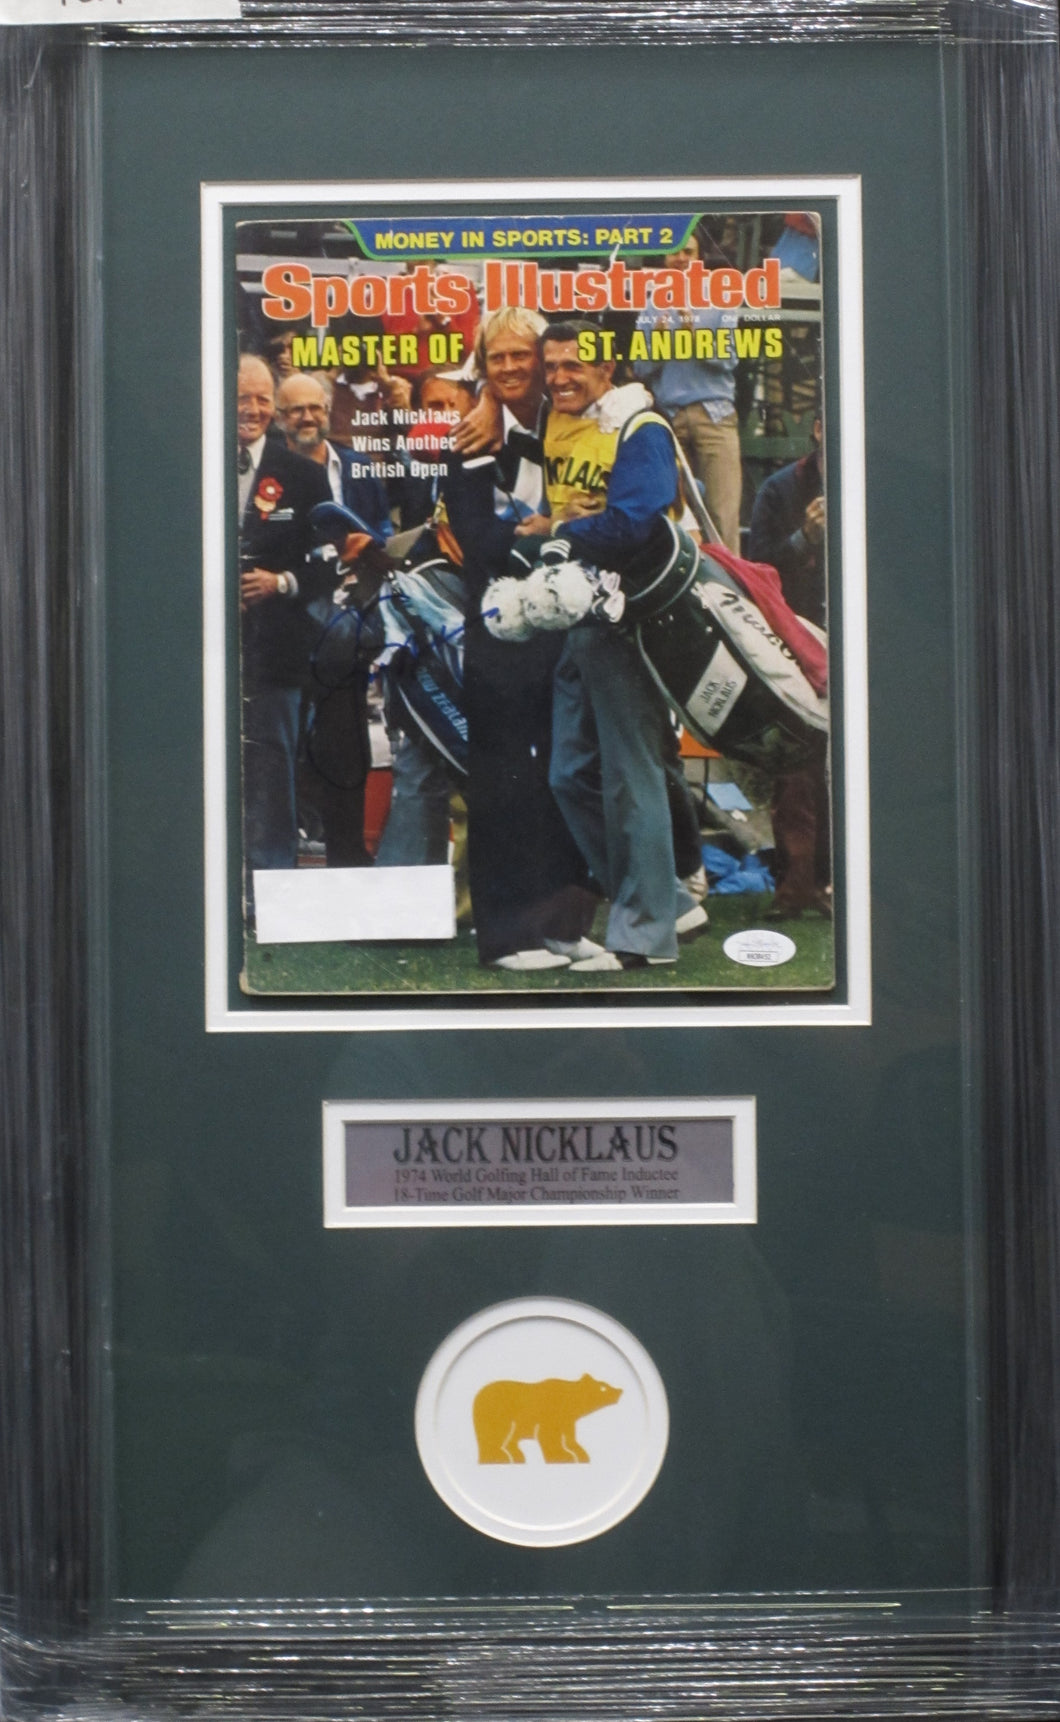 American Golfer Jack Nicklaus Signed 1978 Sports Illustrated Magazine Framed & Matted with JSA COA